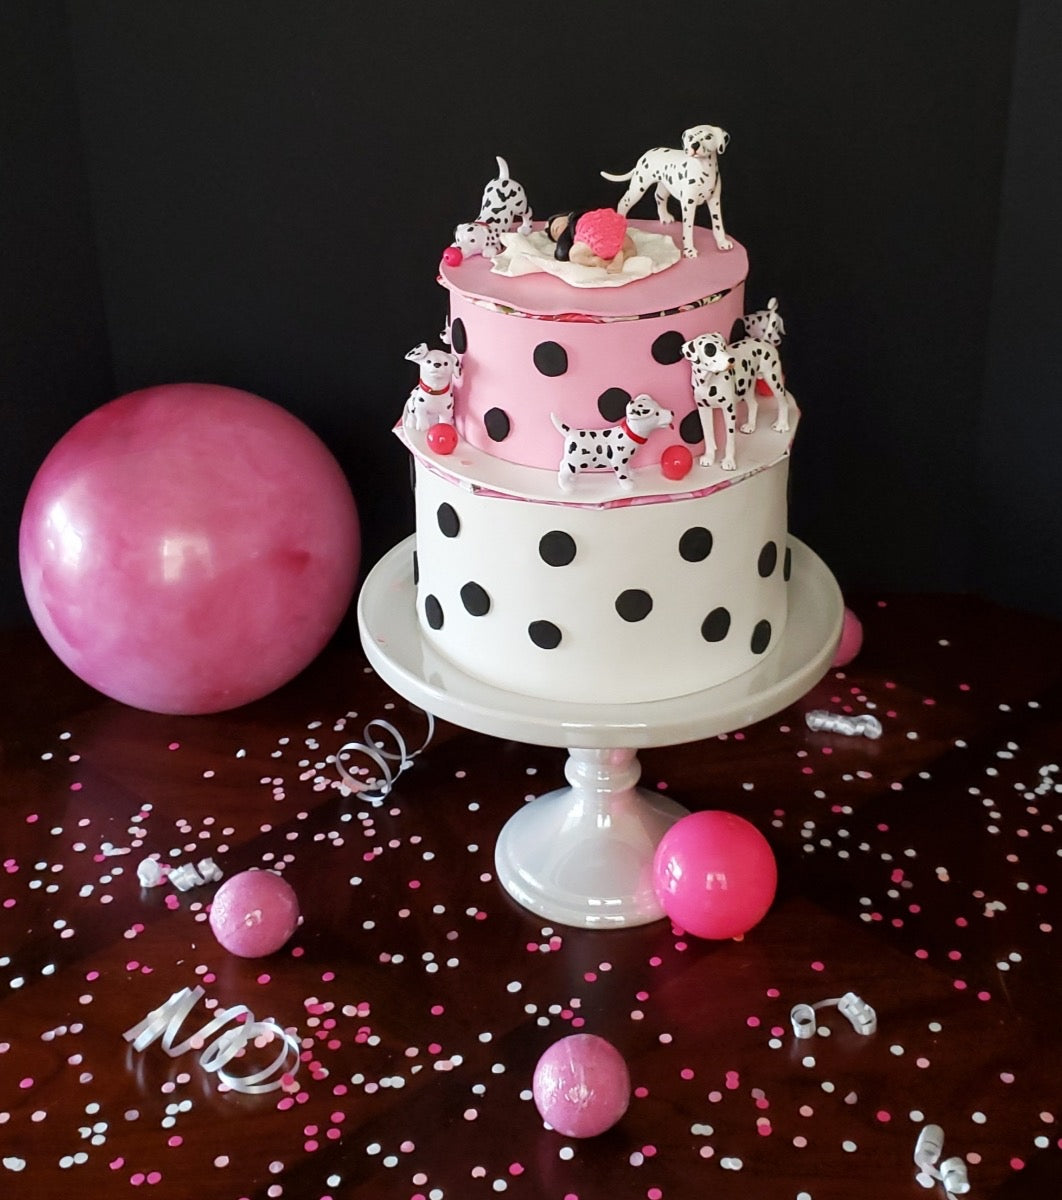 Baby and Dalmatians Confection Box